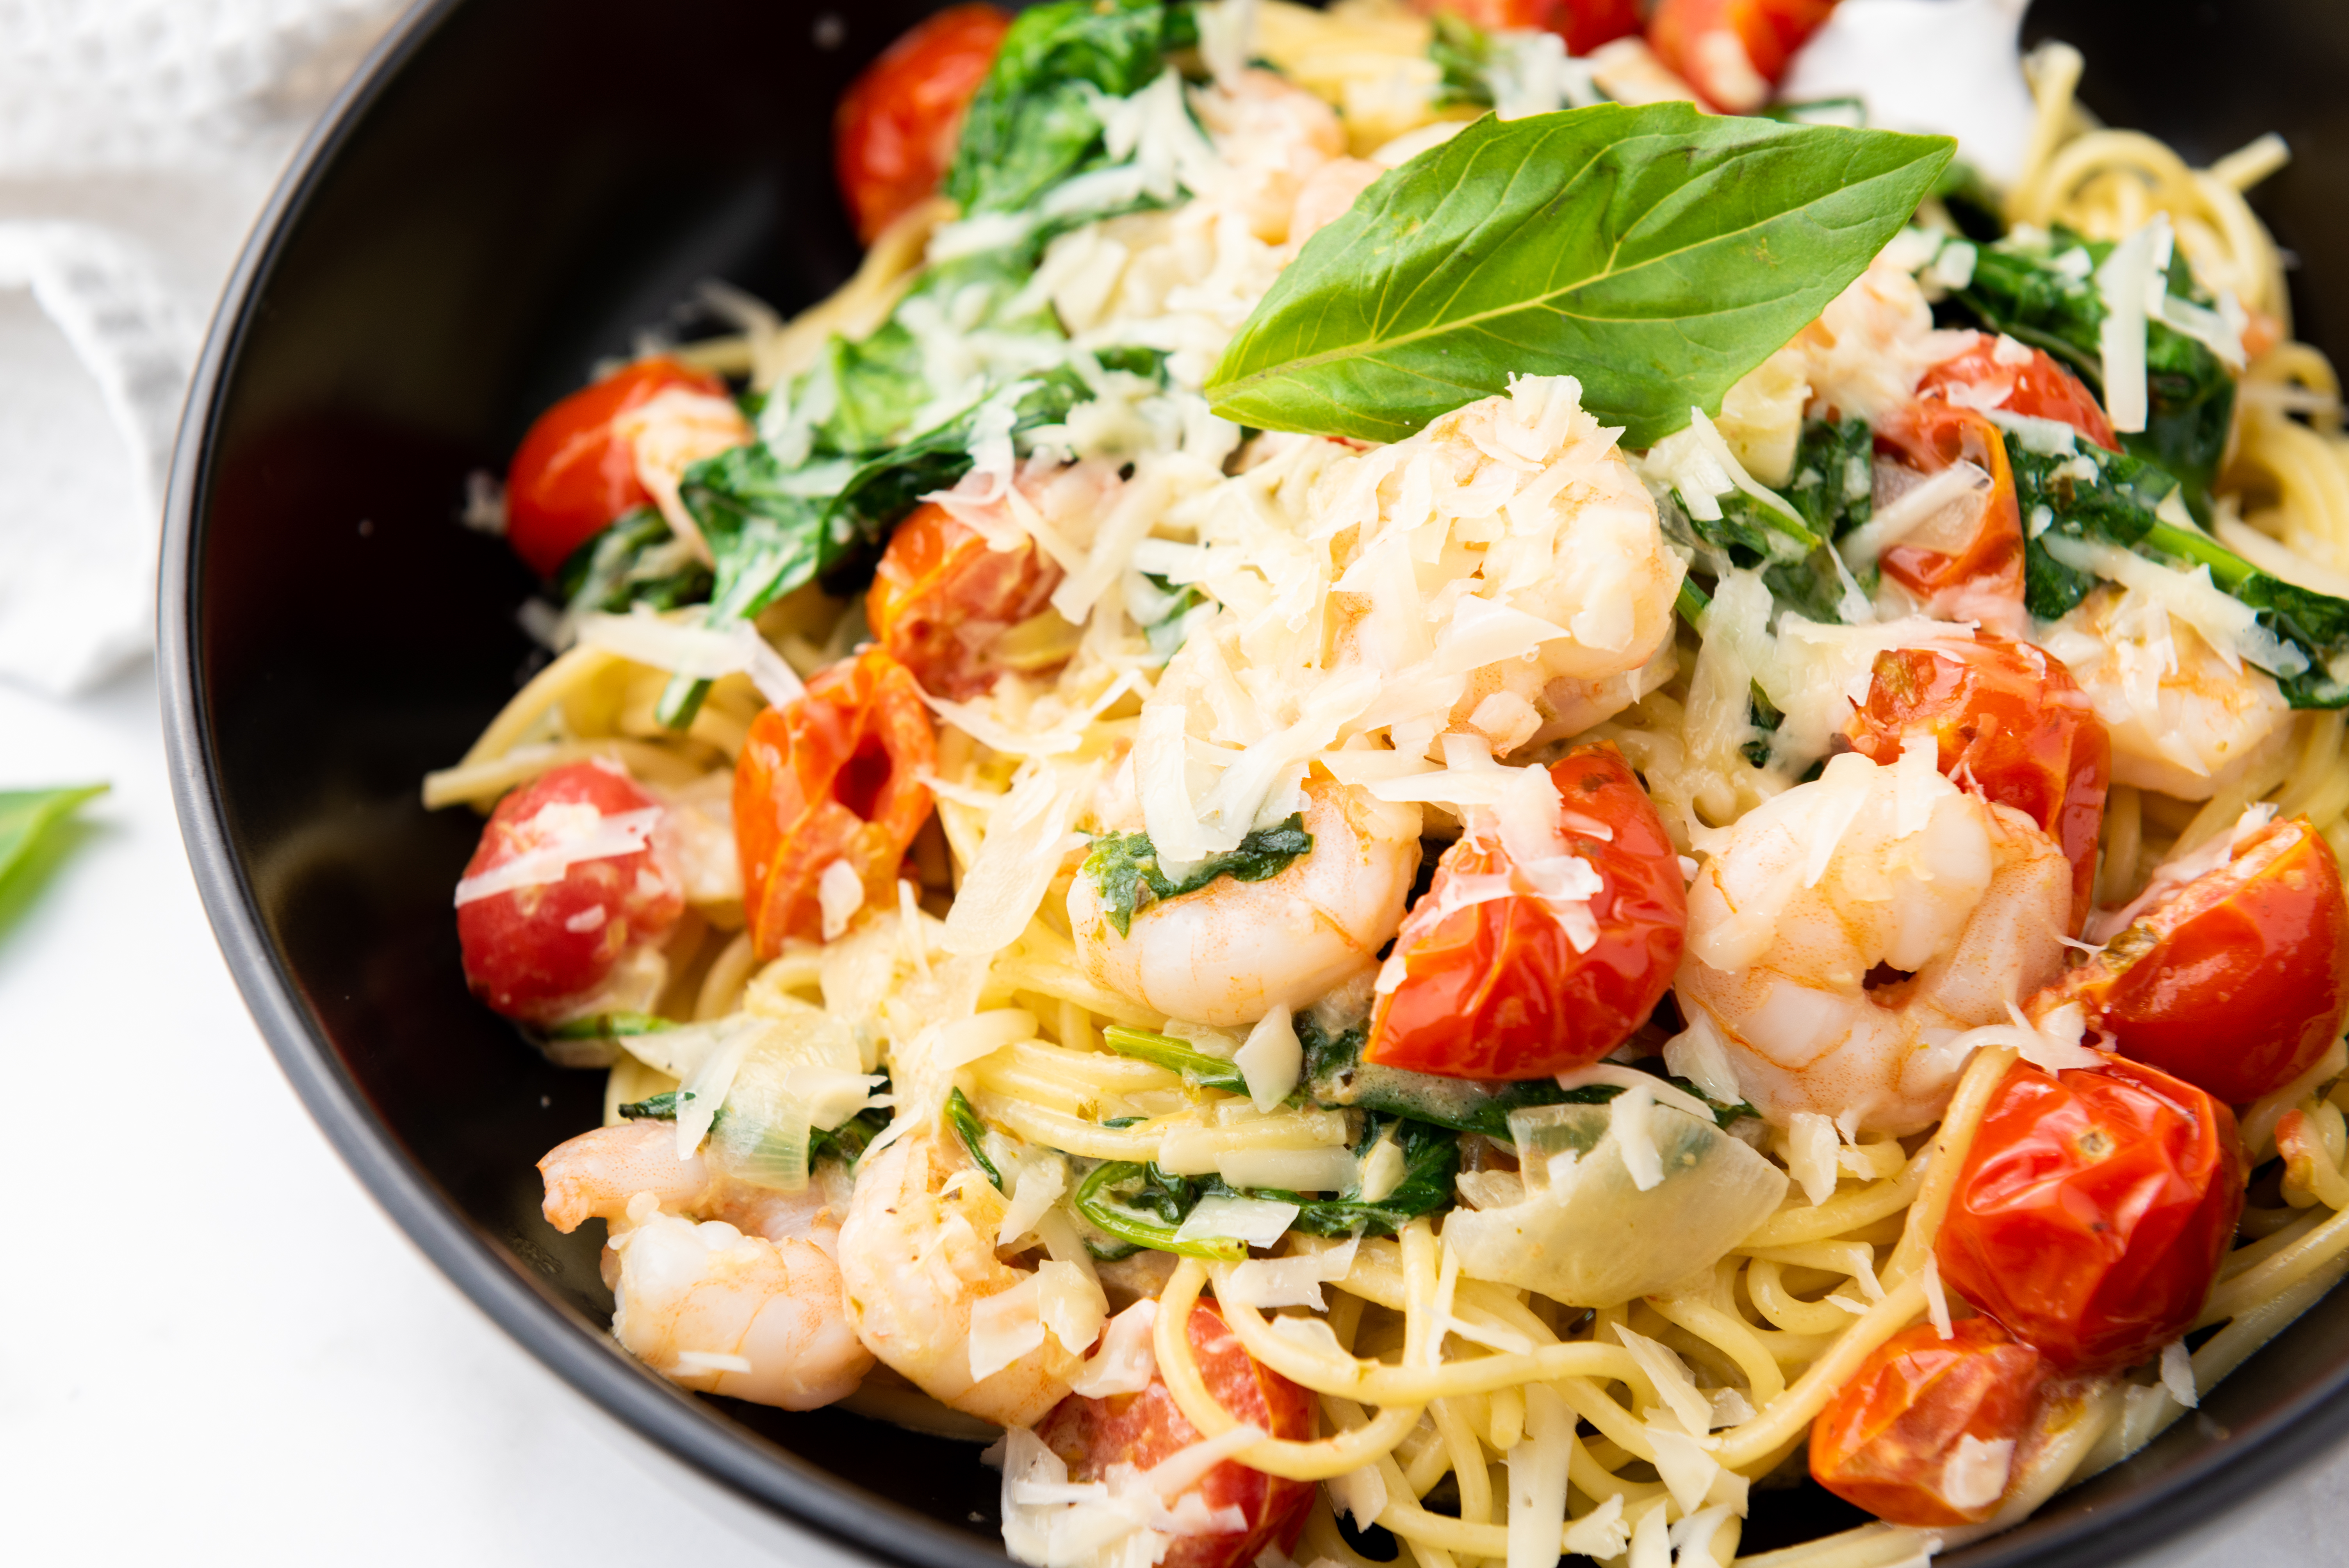 Overhead shot of fork in a bowlful of shrimp scampi with angel hair pasta, filled with cherry tomatoes and spinach and grated cheese